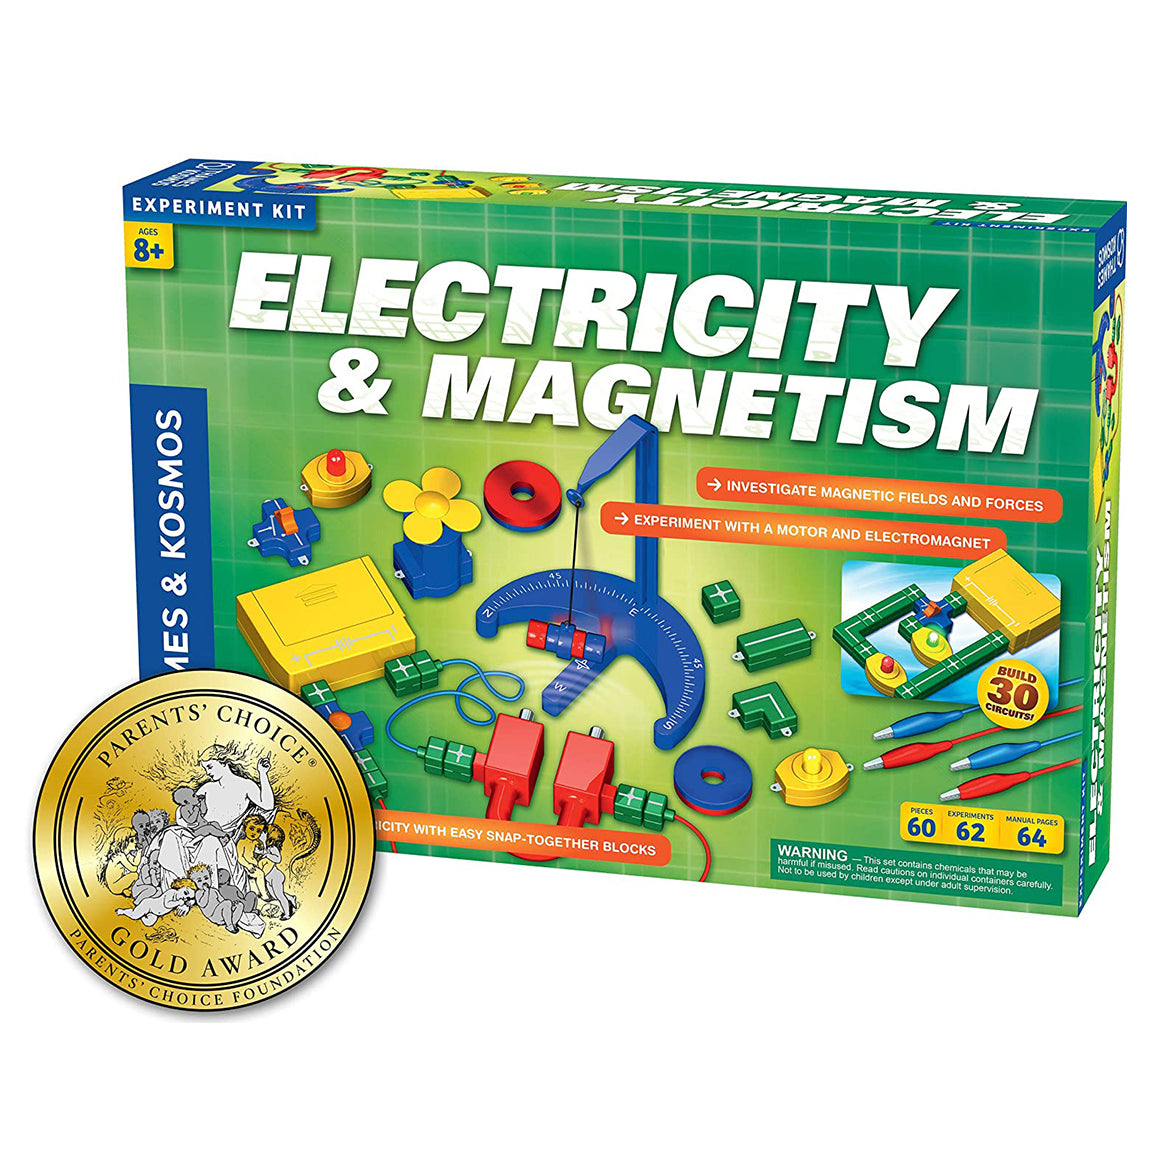 620417 Electricity & Magnetism